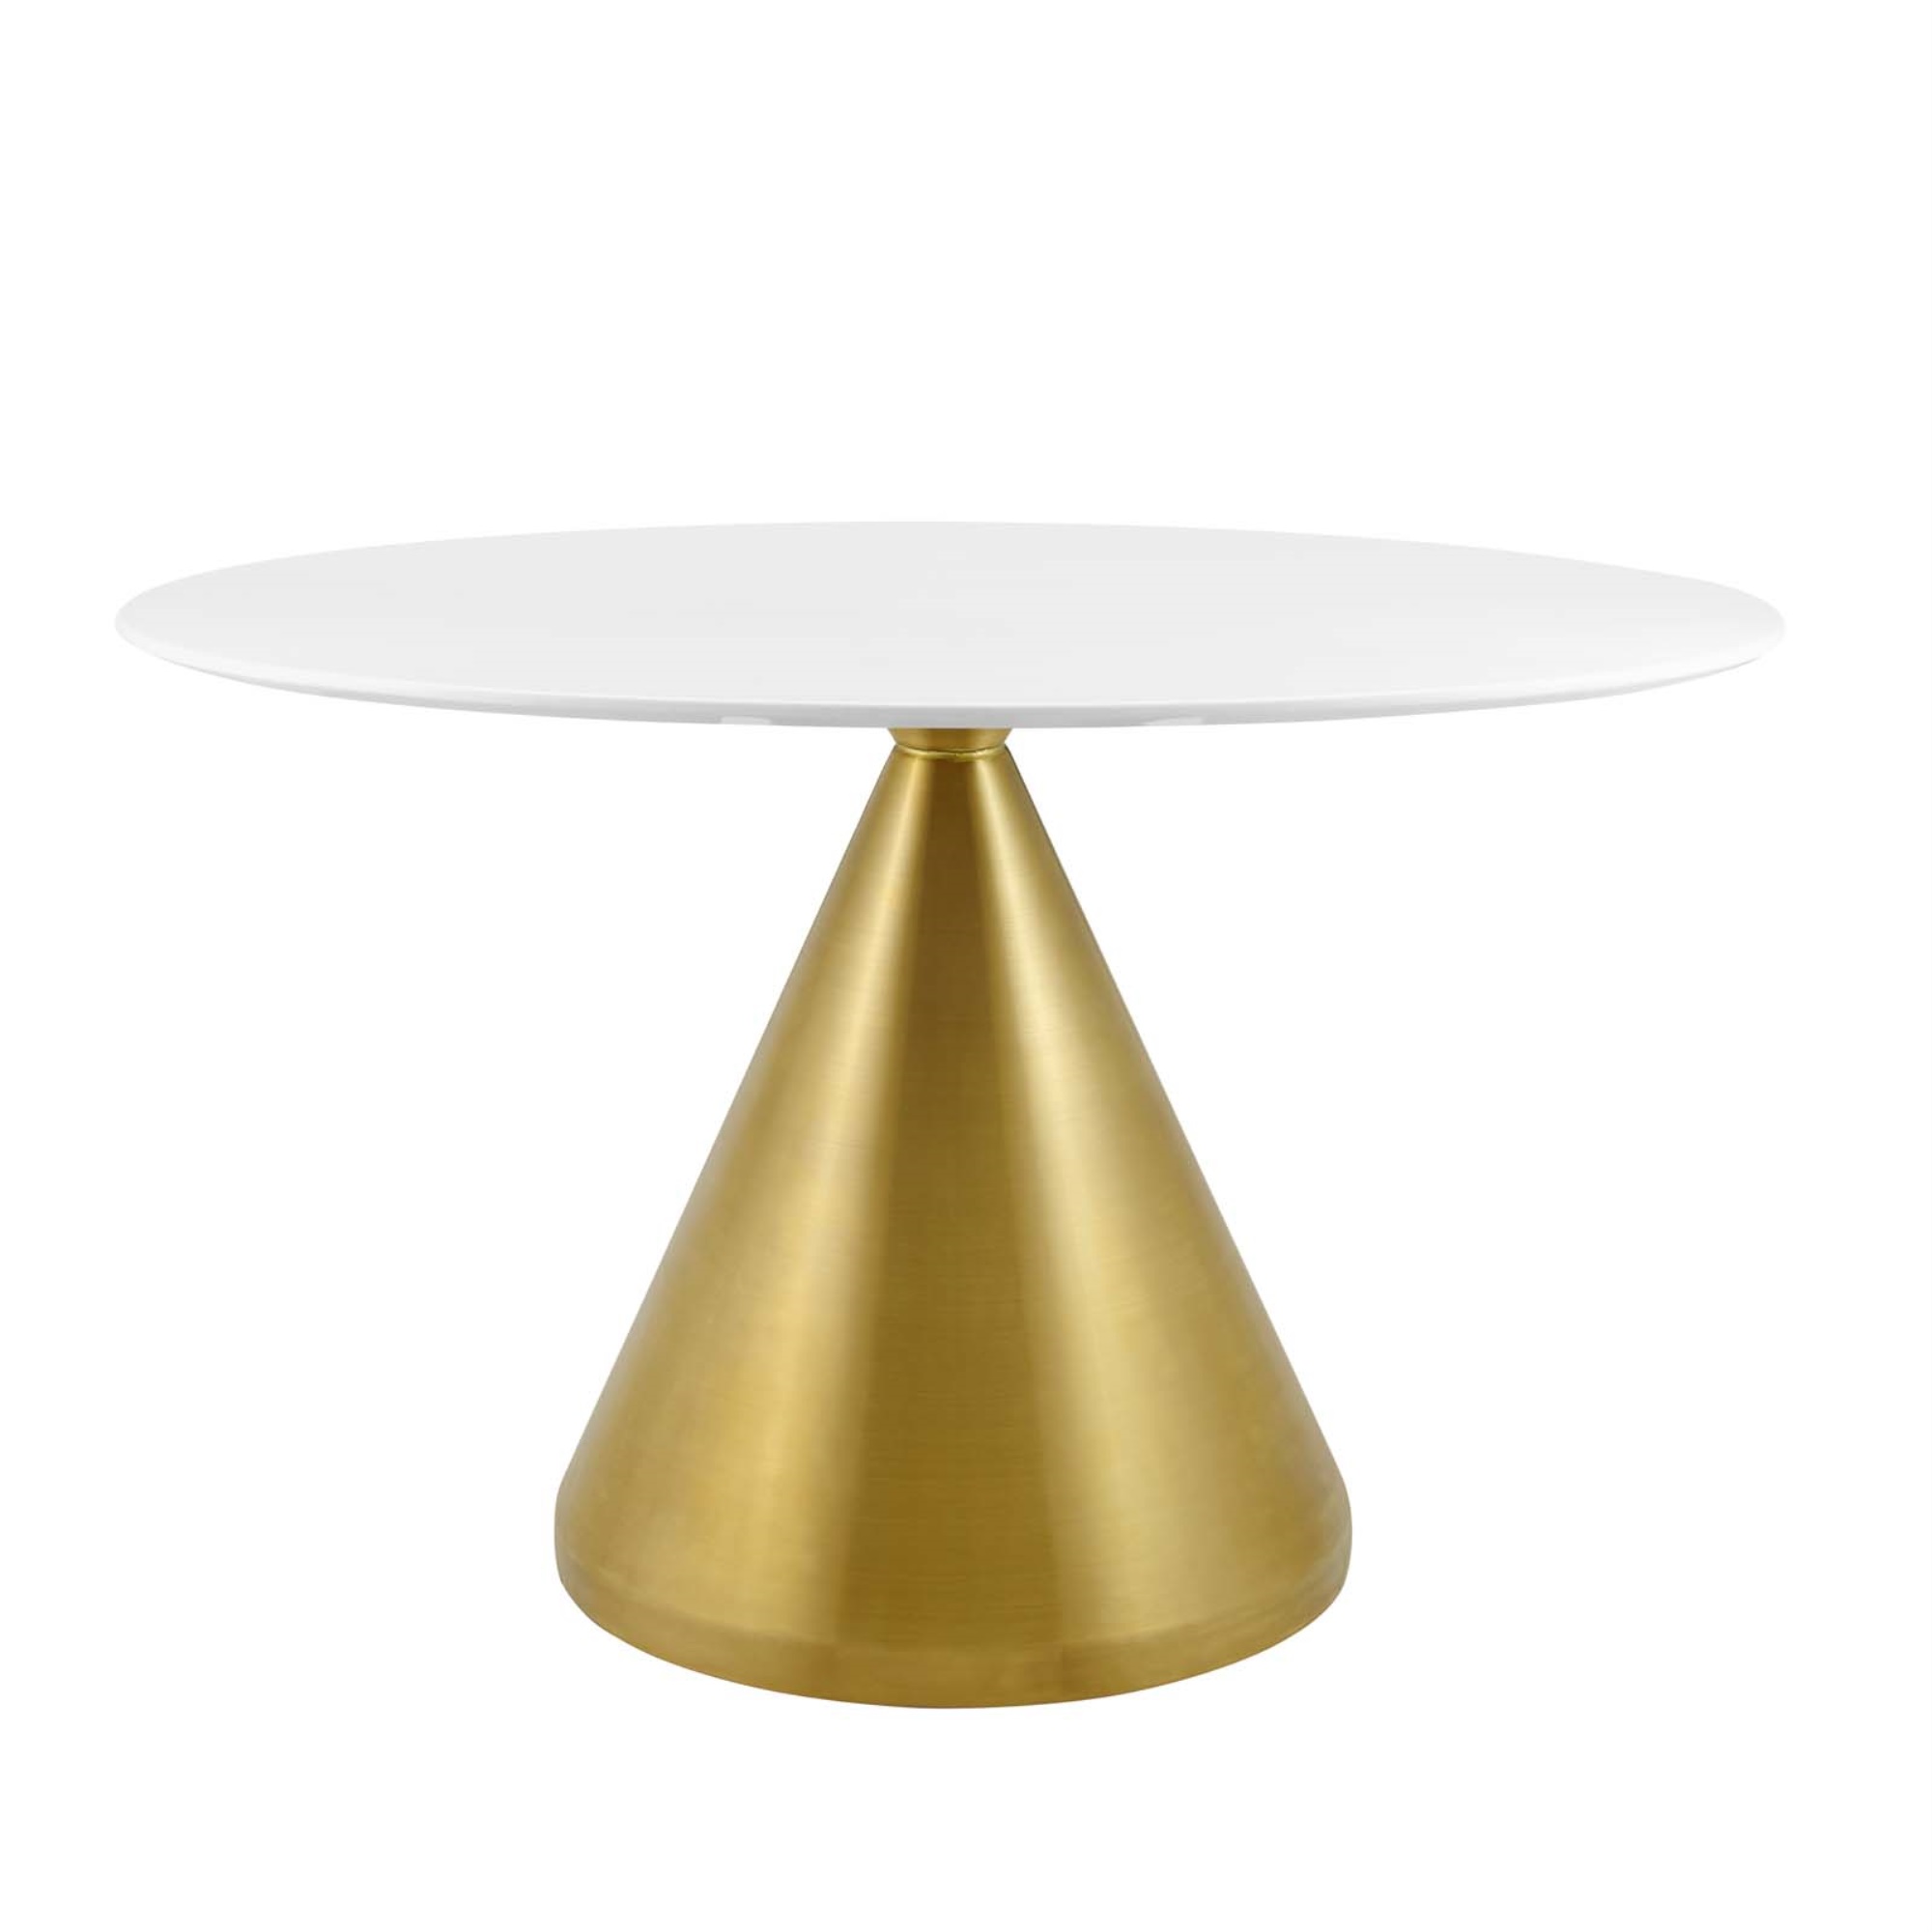 Ergode Tupelo 48" Dining Table - Modern Style, Mid-Century Charm, Polished Gold Metal Base, Easy to Clean, Non-Marking Ring, As